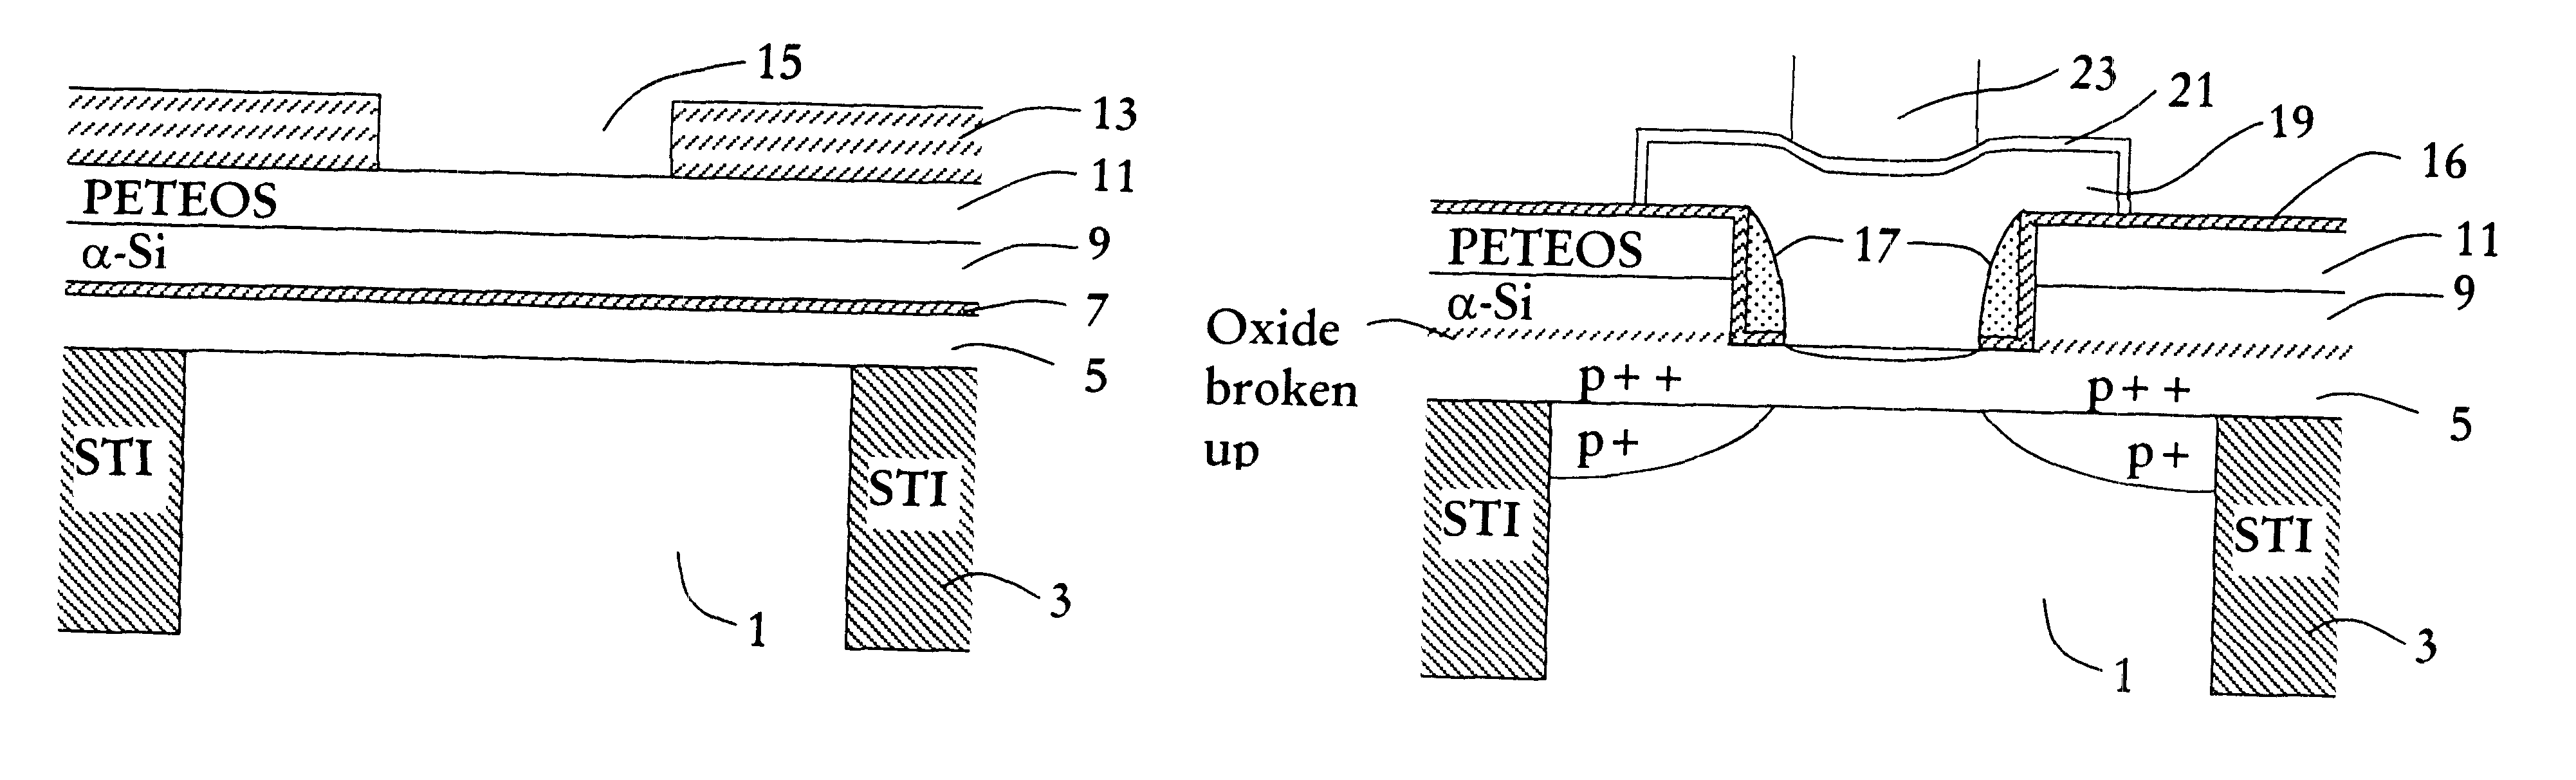 Method in the fabrication of a silicon bipolar transistor